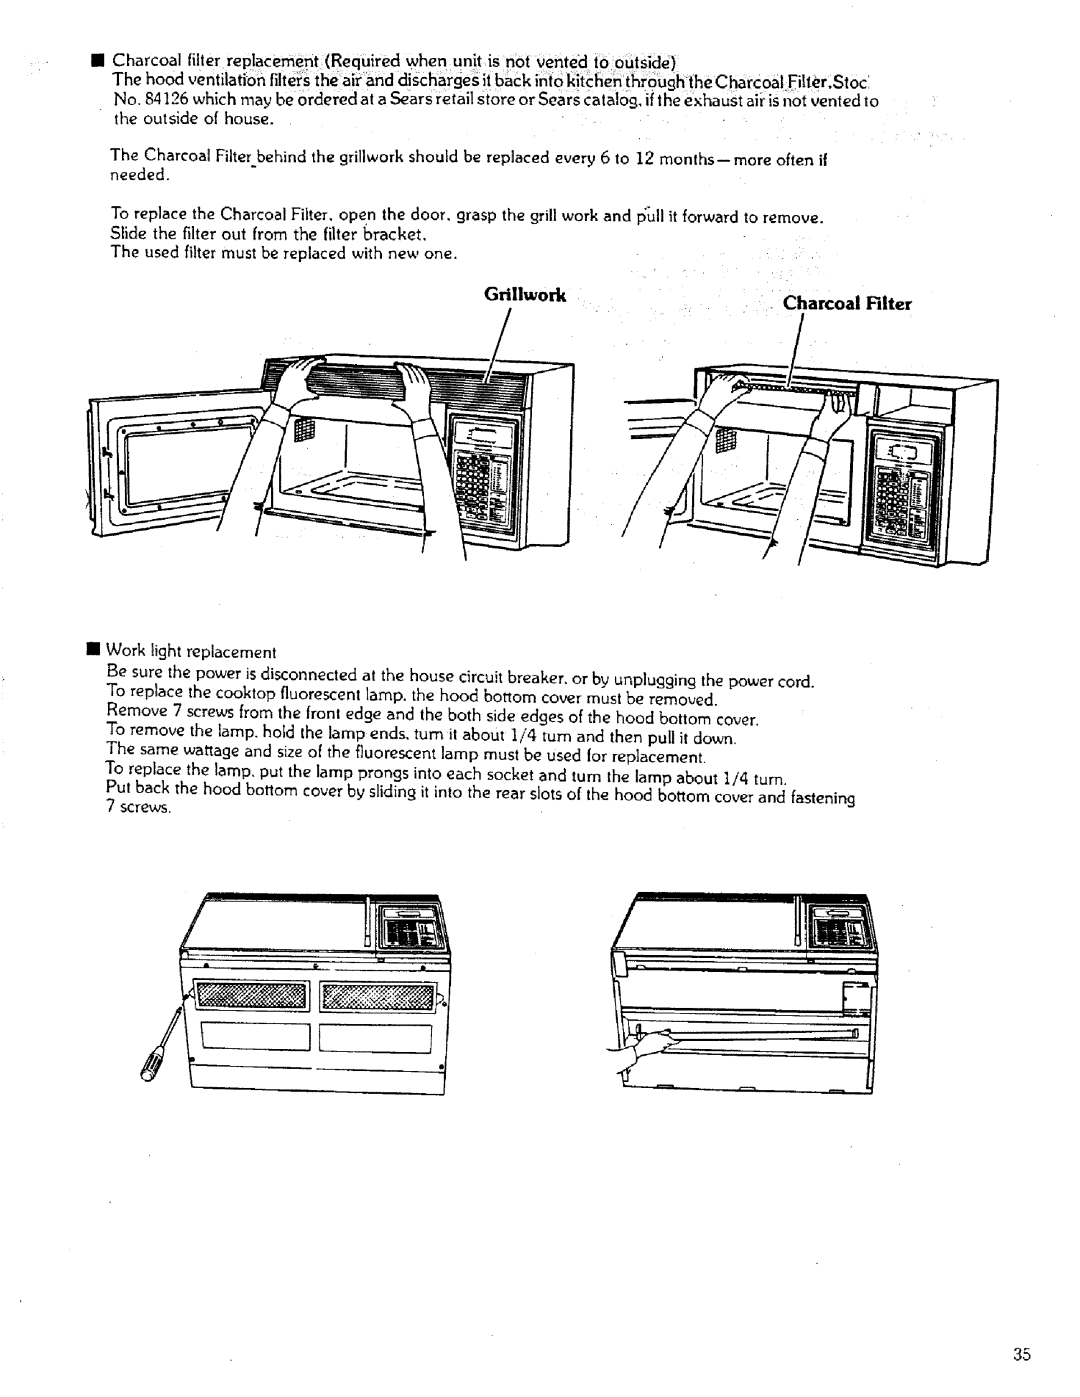 Sears 85951 manual Grillwork, Charcoal, To replace the 